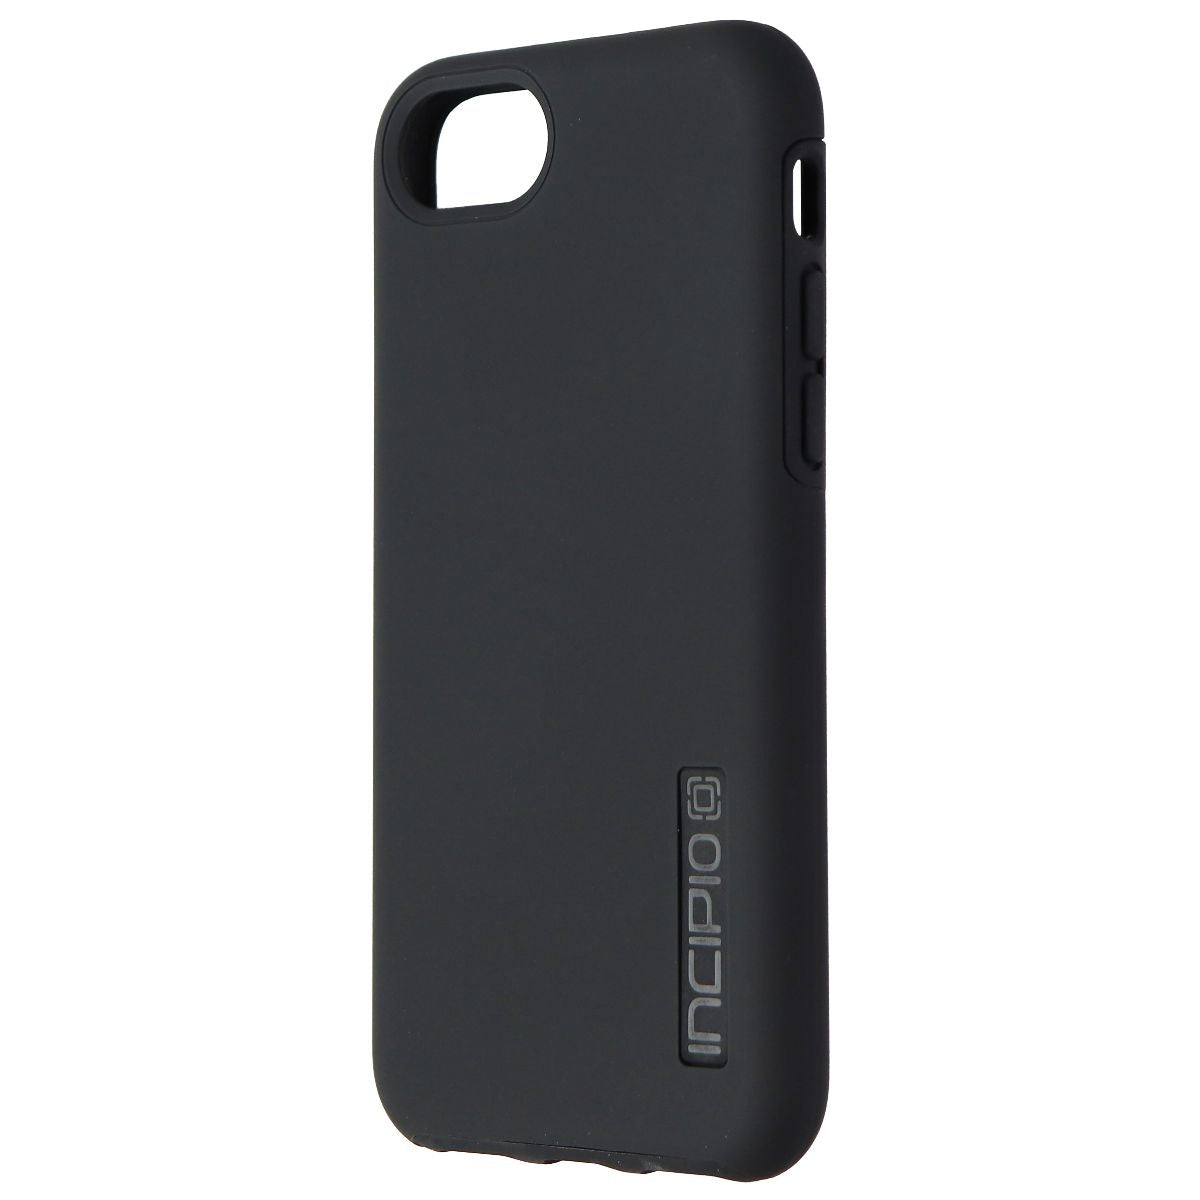 DO NOT USE, USE SC-E3164 FAMILY Cell Phone - Cases, Covers & Skins Incipio    - Simple Cell Bulk Wholesale Pricing - USA Seller